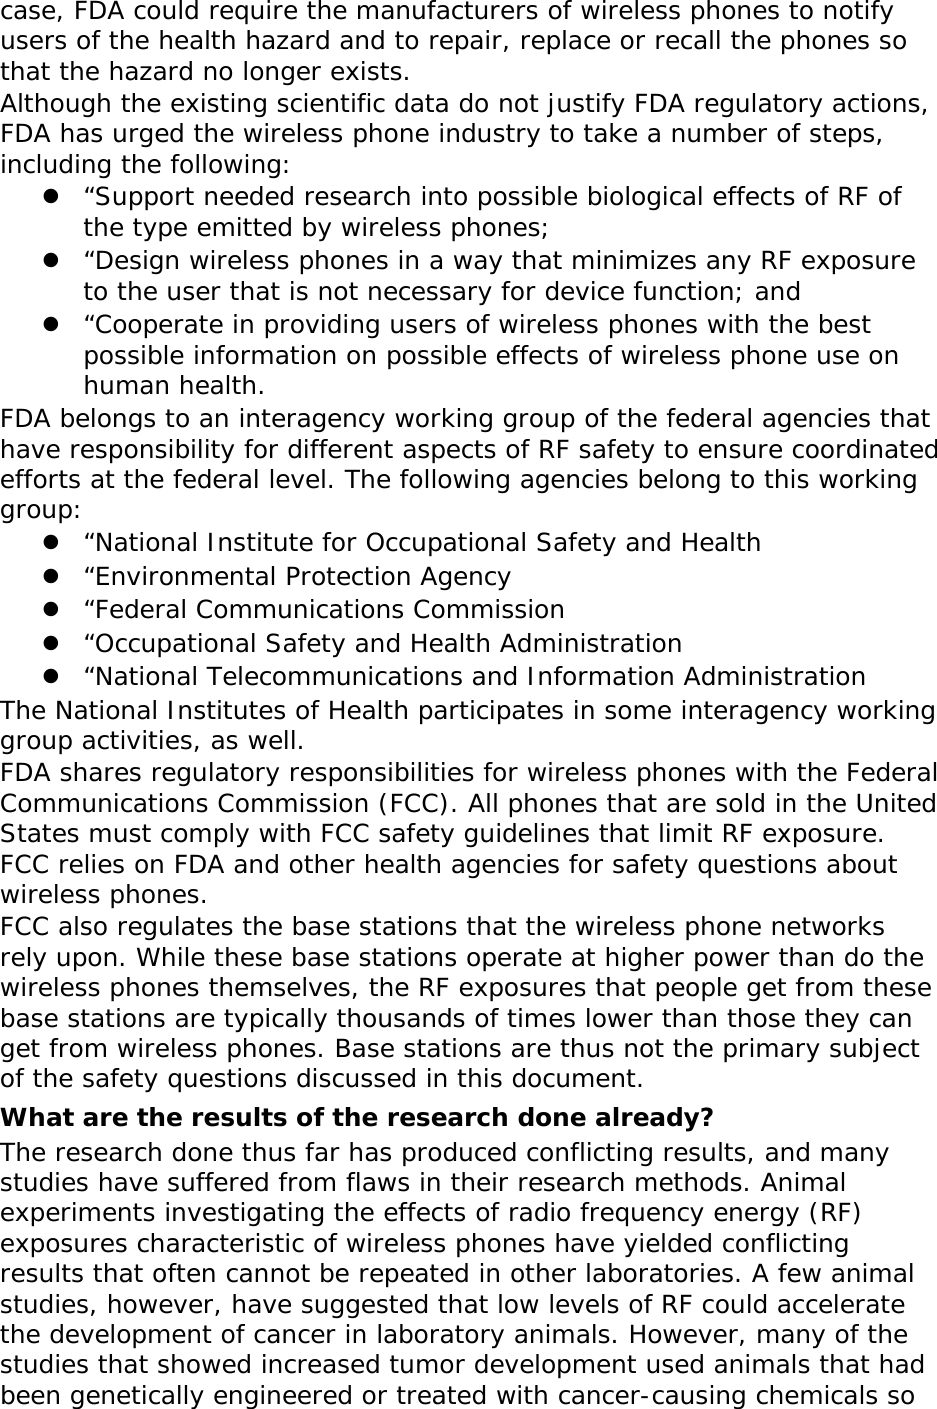 case, FDA could require the manufacturers of wireless phones to notify users of the health hazard and to repair, replace or recall the phones so that the hazard no longer exists. Although the existing scientific data do not justify FDA regulatory actions, FDA has urged the wireless phone industry to take a number of steps, including the following: z “Support needed research into possible biological effects of RF of the type emitted by wireless phones; z “Design wireless phones in a way that minimizes any RF exposure to the user that is not necessary for device function; and z “Cooperate in providing users of wireless phones with the best possible information on possible effects of wireless phone use on human health. FDA belongs to an interagency working group of the federal agencies that have responsibility for different aspects of RF safety to ensure coordinated efforts at the federal level. The following agencies belong to this working group: z “National Institute for Occupational Safety and Health z “Environmental Protection Agency z “Federal Communications Commission z “Occupational Safety and Health Administration z “National Telecommunications and Information Administration The National Institutes of Health participates in some interagency working group activities, as well. FDA shares regulatory responsibilities for wireless phones with the Federal Communications Commission (FCC). All phones that are sold in the United States must comply with FCC safety guidelines that limit RF exposure. FCC relies on FDA and other health agencies for safety questions about wireless phones. FCC also regulates the base stations that the wireless phone networks rely upon. While these base stations operate at higher power than do the wireless phones themselves, the RF exposures that people get from these base stations are typically thousands of times lower than those they can get from wireless phones. Base stations are thus not the primary subject of the safety questions discussed in this document. What are the results of the research done already? The research done thus far has produced conflicting results, and many studies have suffered from flaws in their research methods. Animal experiments investigating the effects of radio frequency energy (RF) exposures characteristic of wireless phones have yielded conflicting results that often cannot be repeated in other laboratories. A few animal studies, however, have suggested that low levels of RF could accelerate the development of cancer in laboratory animals. However, many of the studies that showed increased tumor development used animals that had been genetically engineered or treated with cancer-causing chemicals so 